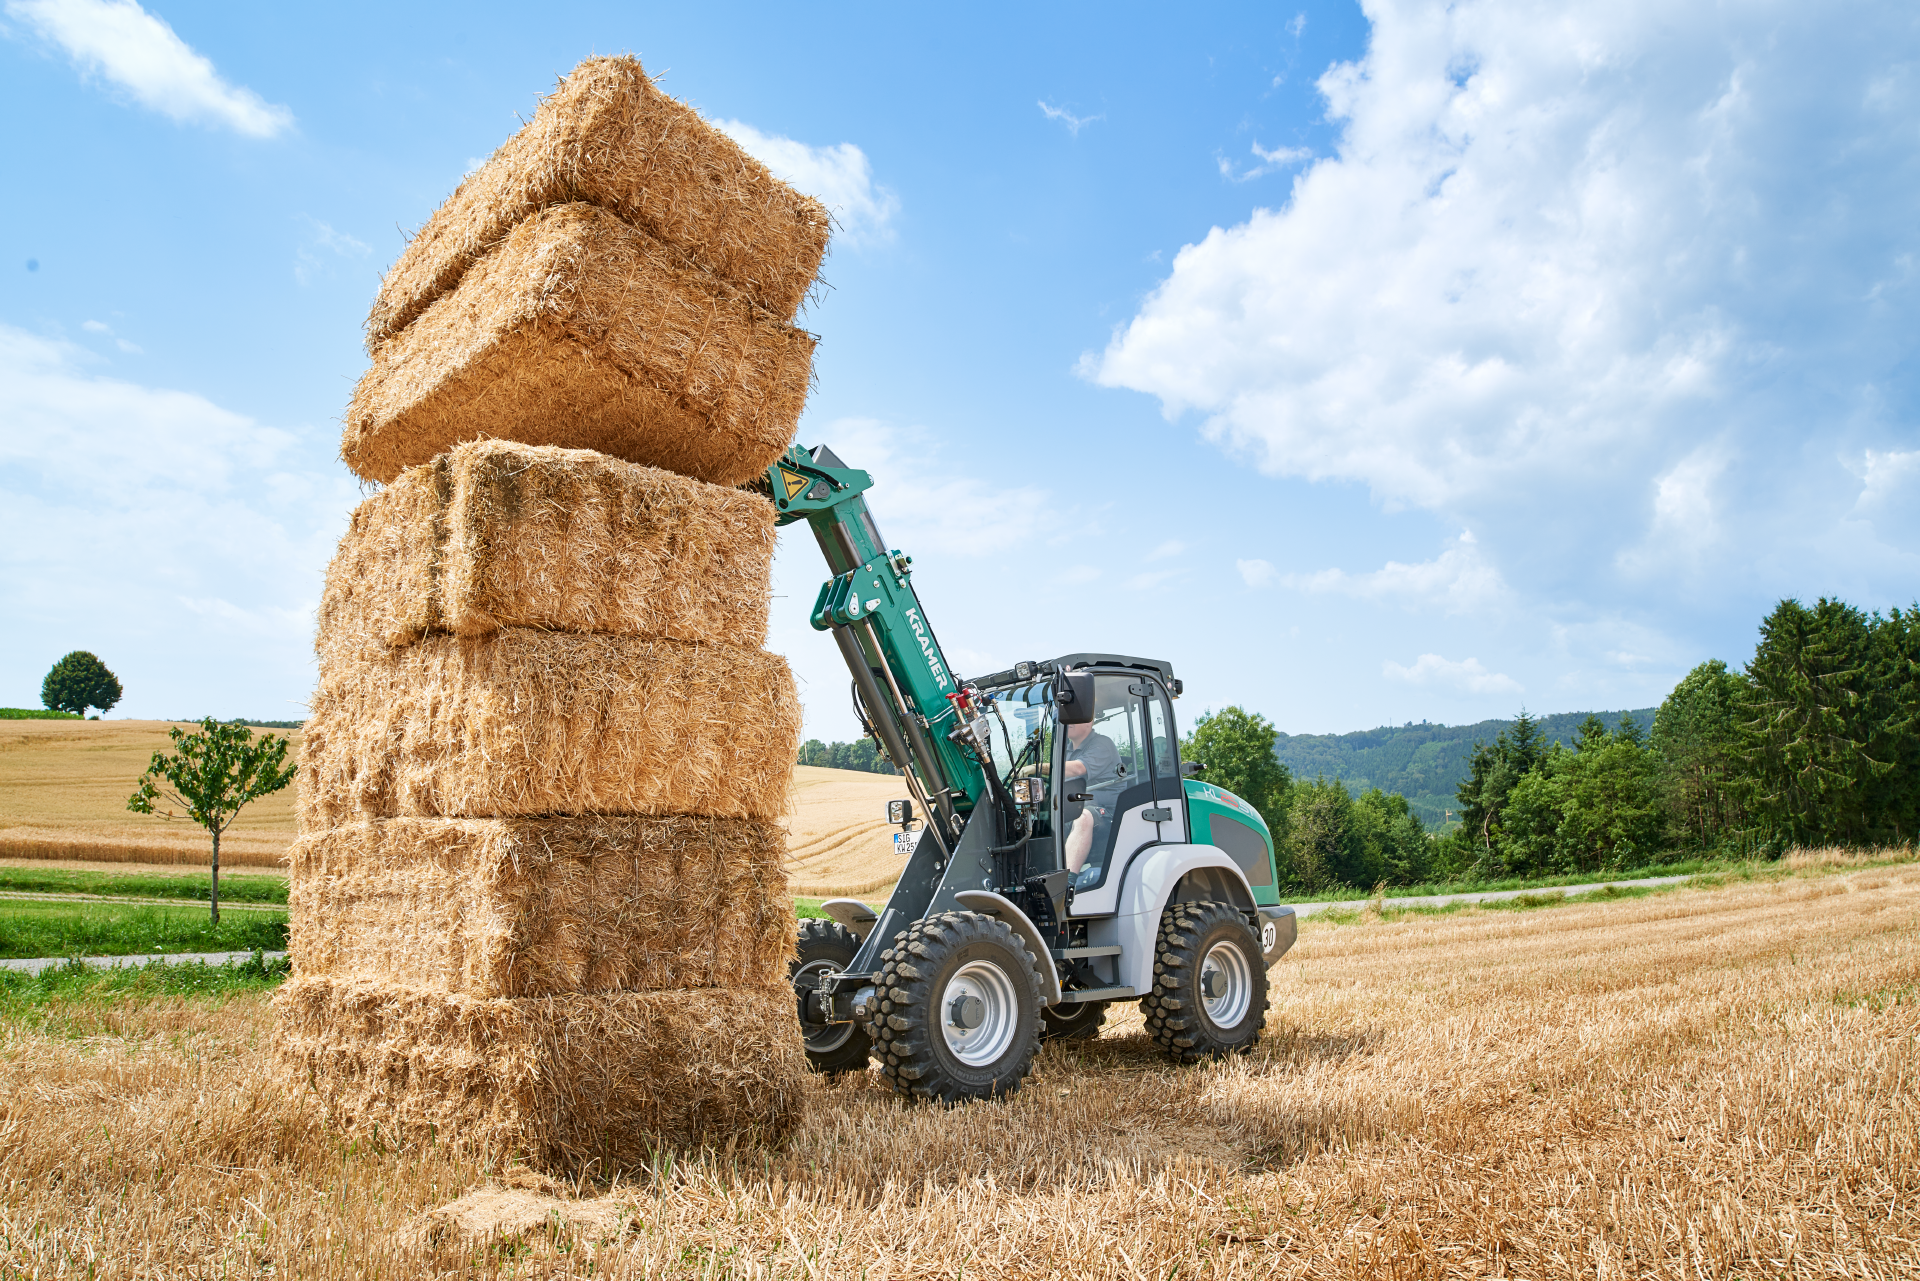 The Kramer telescopic wheel loader KL25.5T while stacking straw on a field.